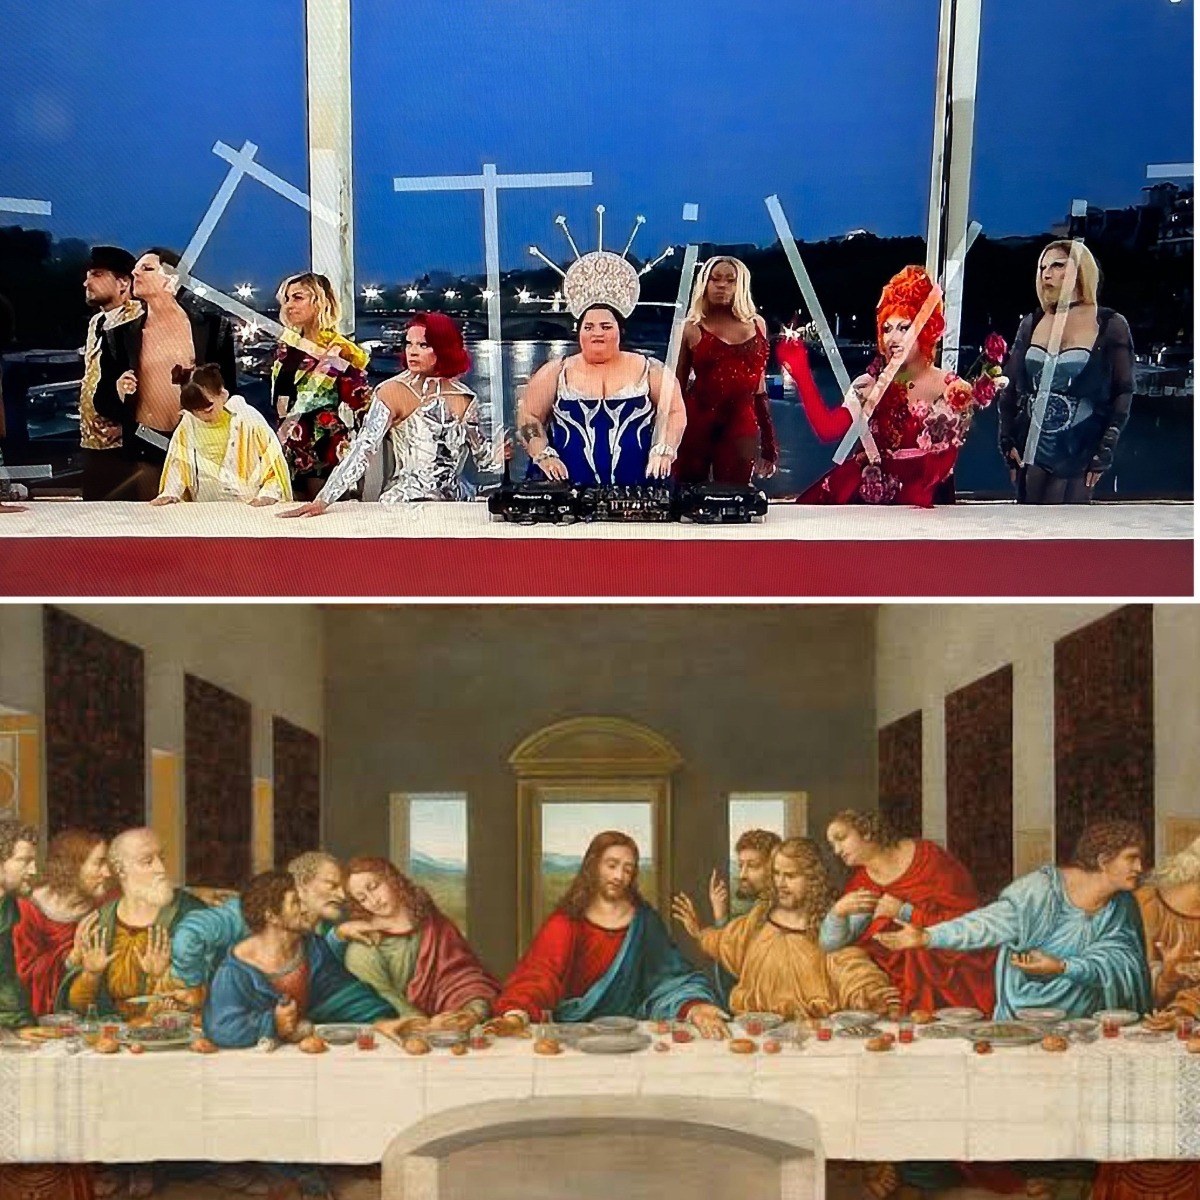 A tableau at the Paris Olympic Games opening ceremony that parodied Leonardo da Vinci's famous The Last Supper painting was panned by Christians world over.